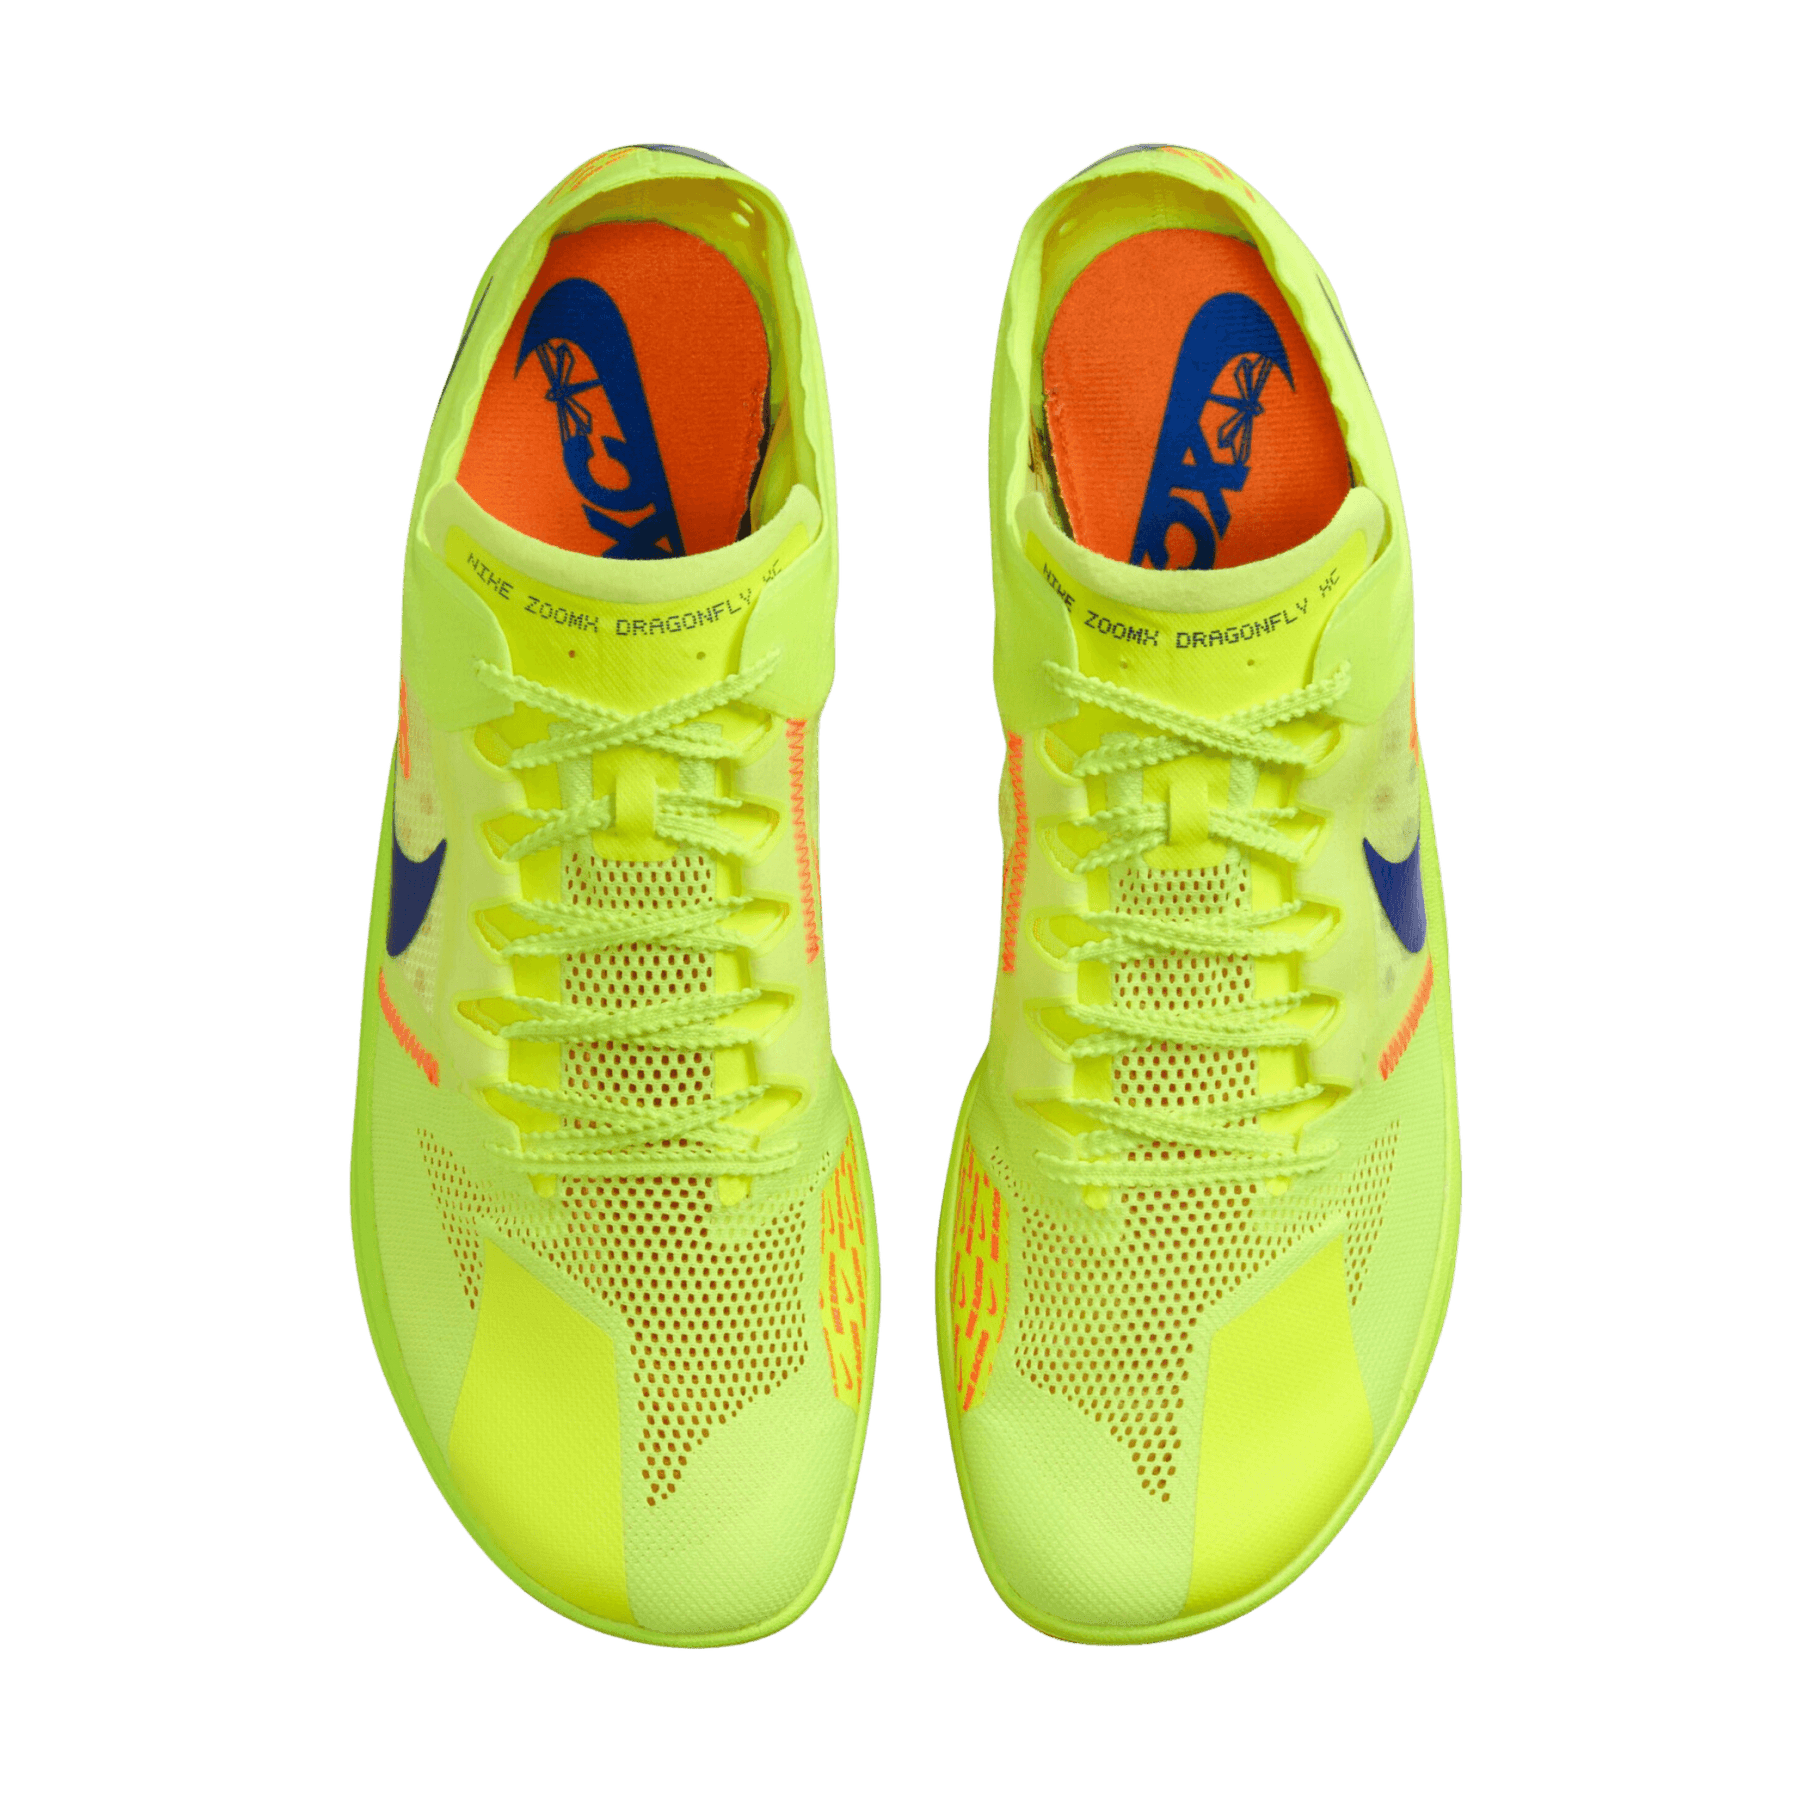 NIKE MEN AND WOMEN'S ZOOMX DRAGONFLY XC